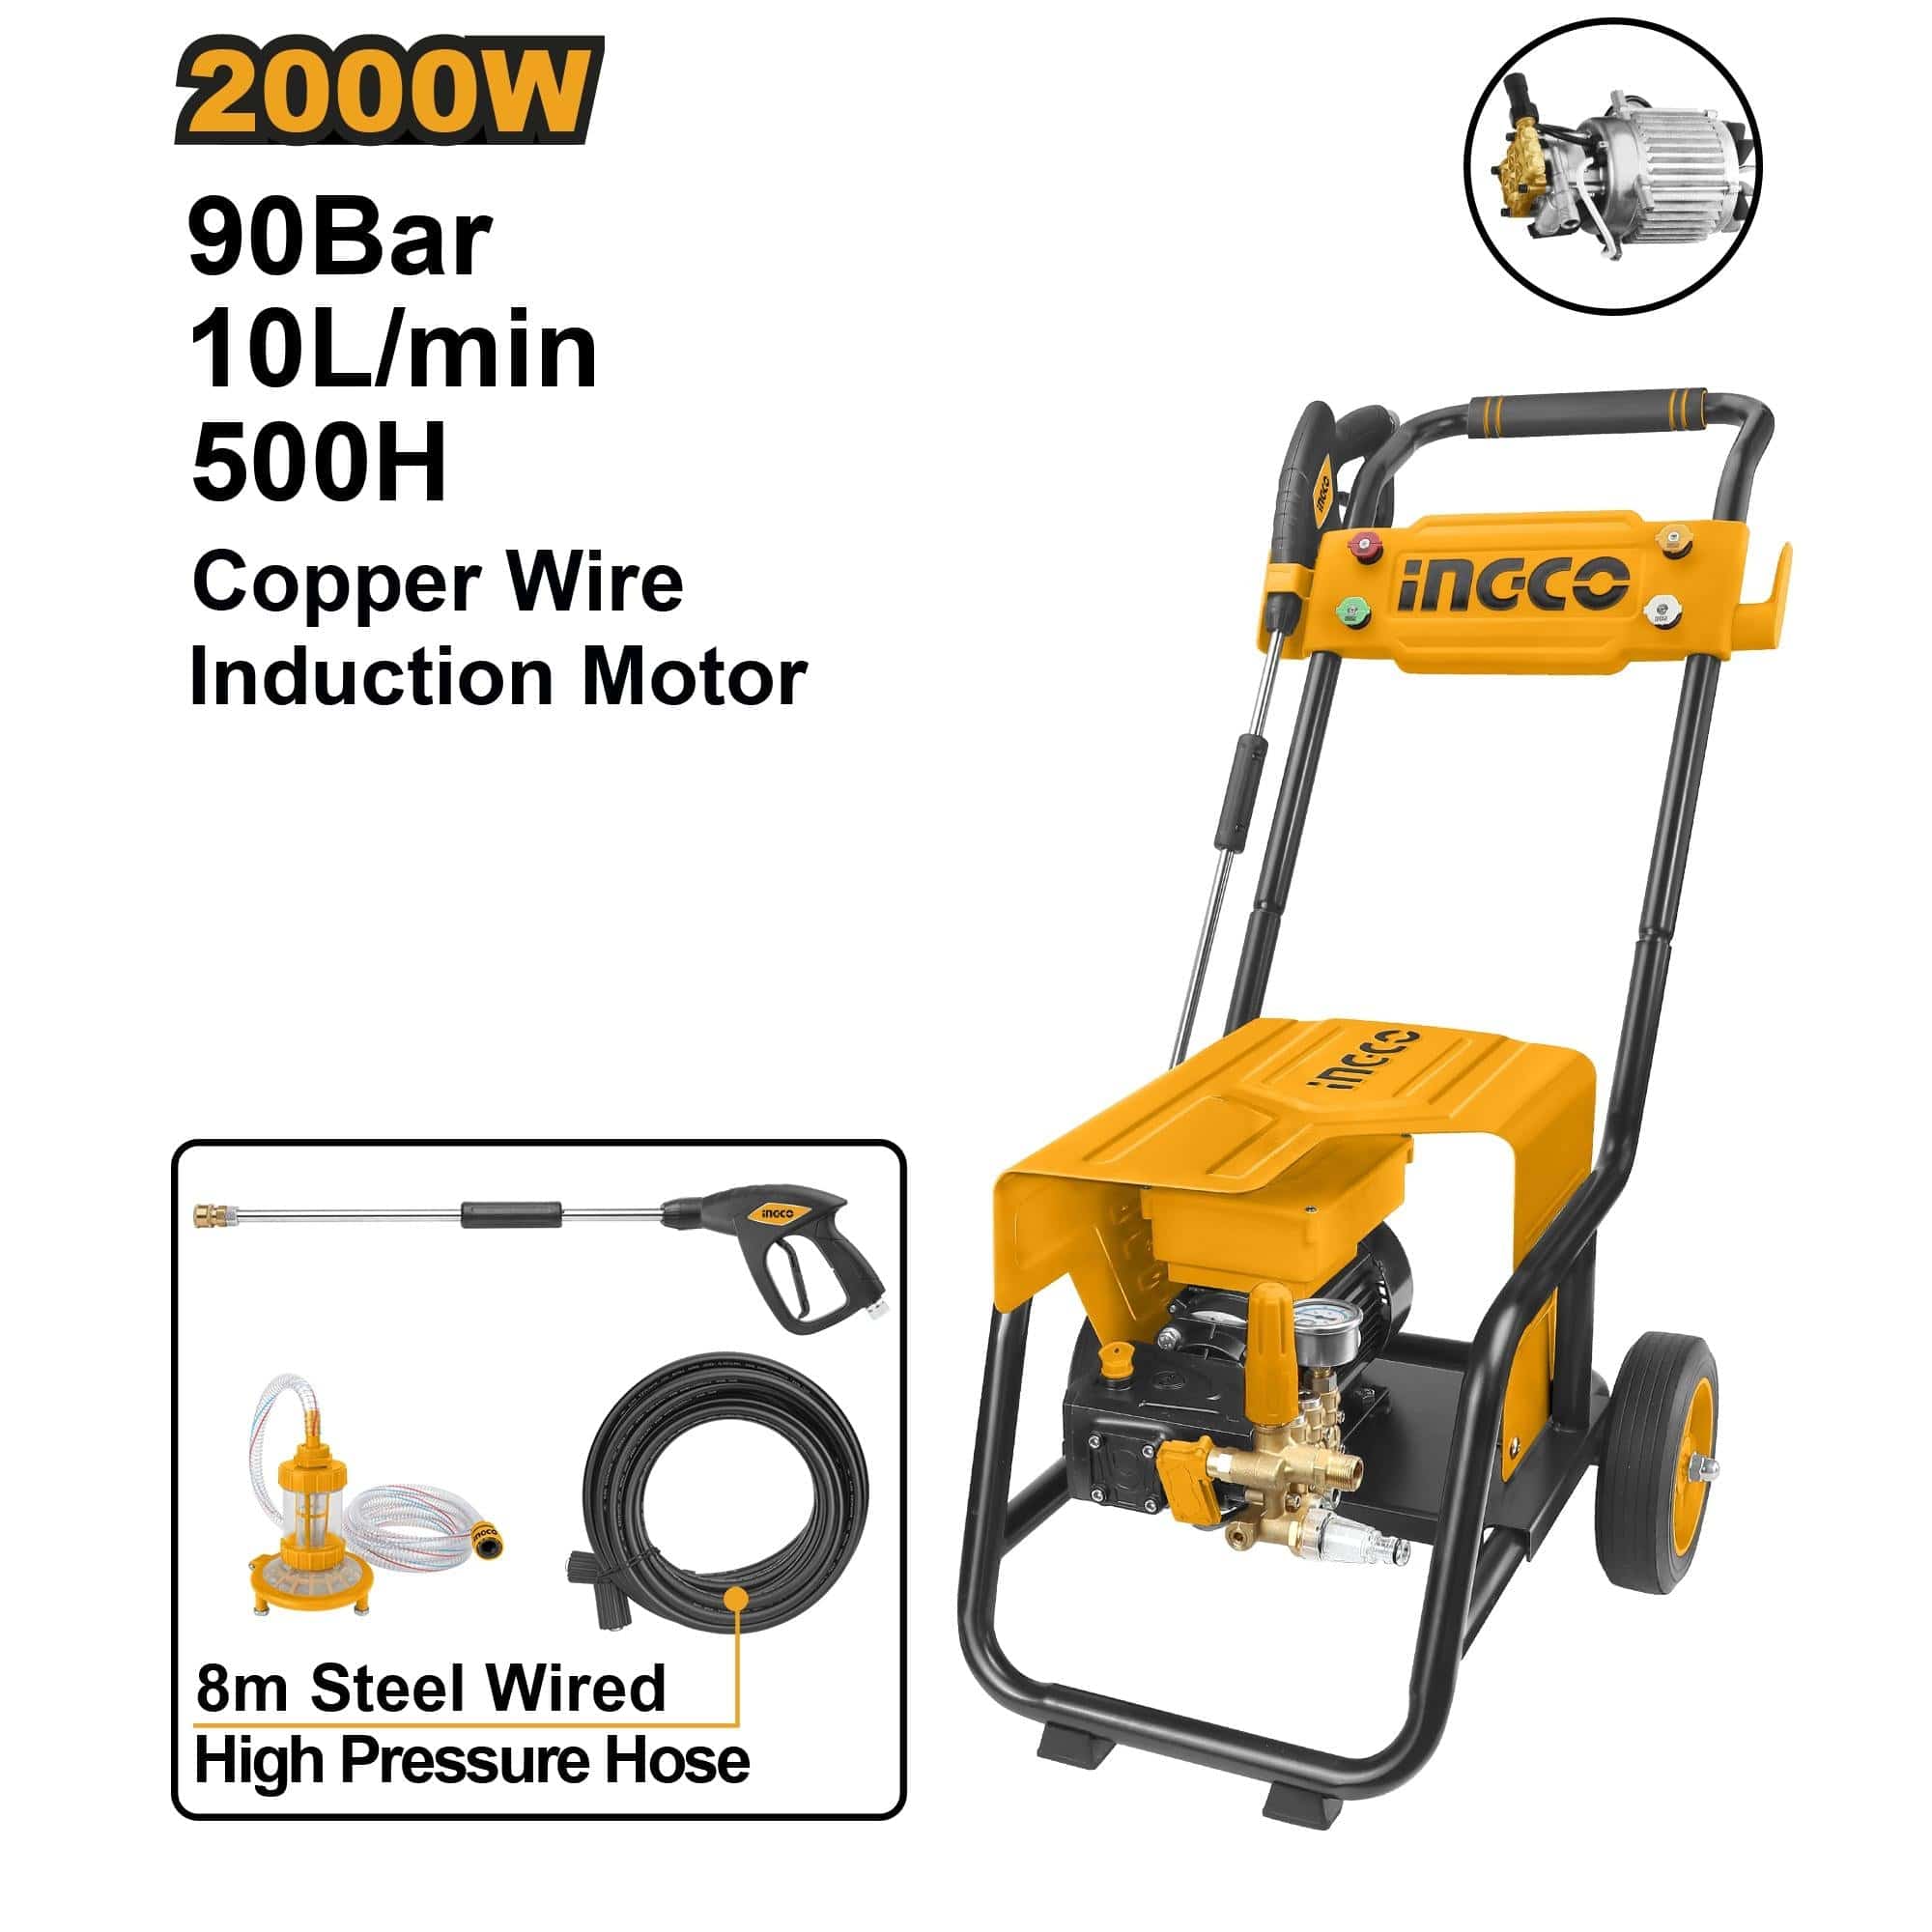 Ingco High Pressure Washer For Commercial Use 2400W - HPWR30018 | Supply Master Accra, Ghana Pressure Washer Buy Tools hardware Building materials